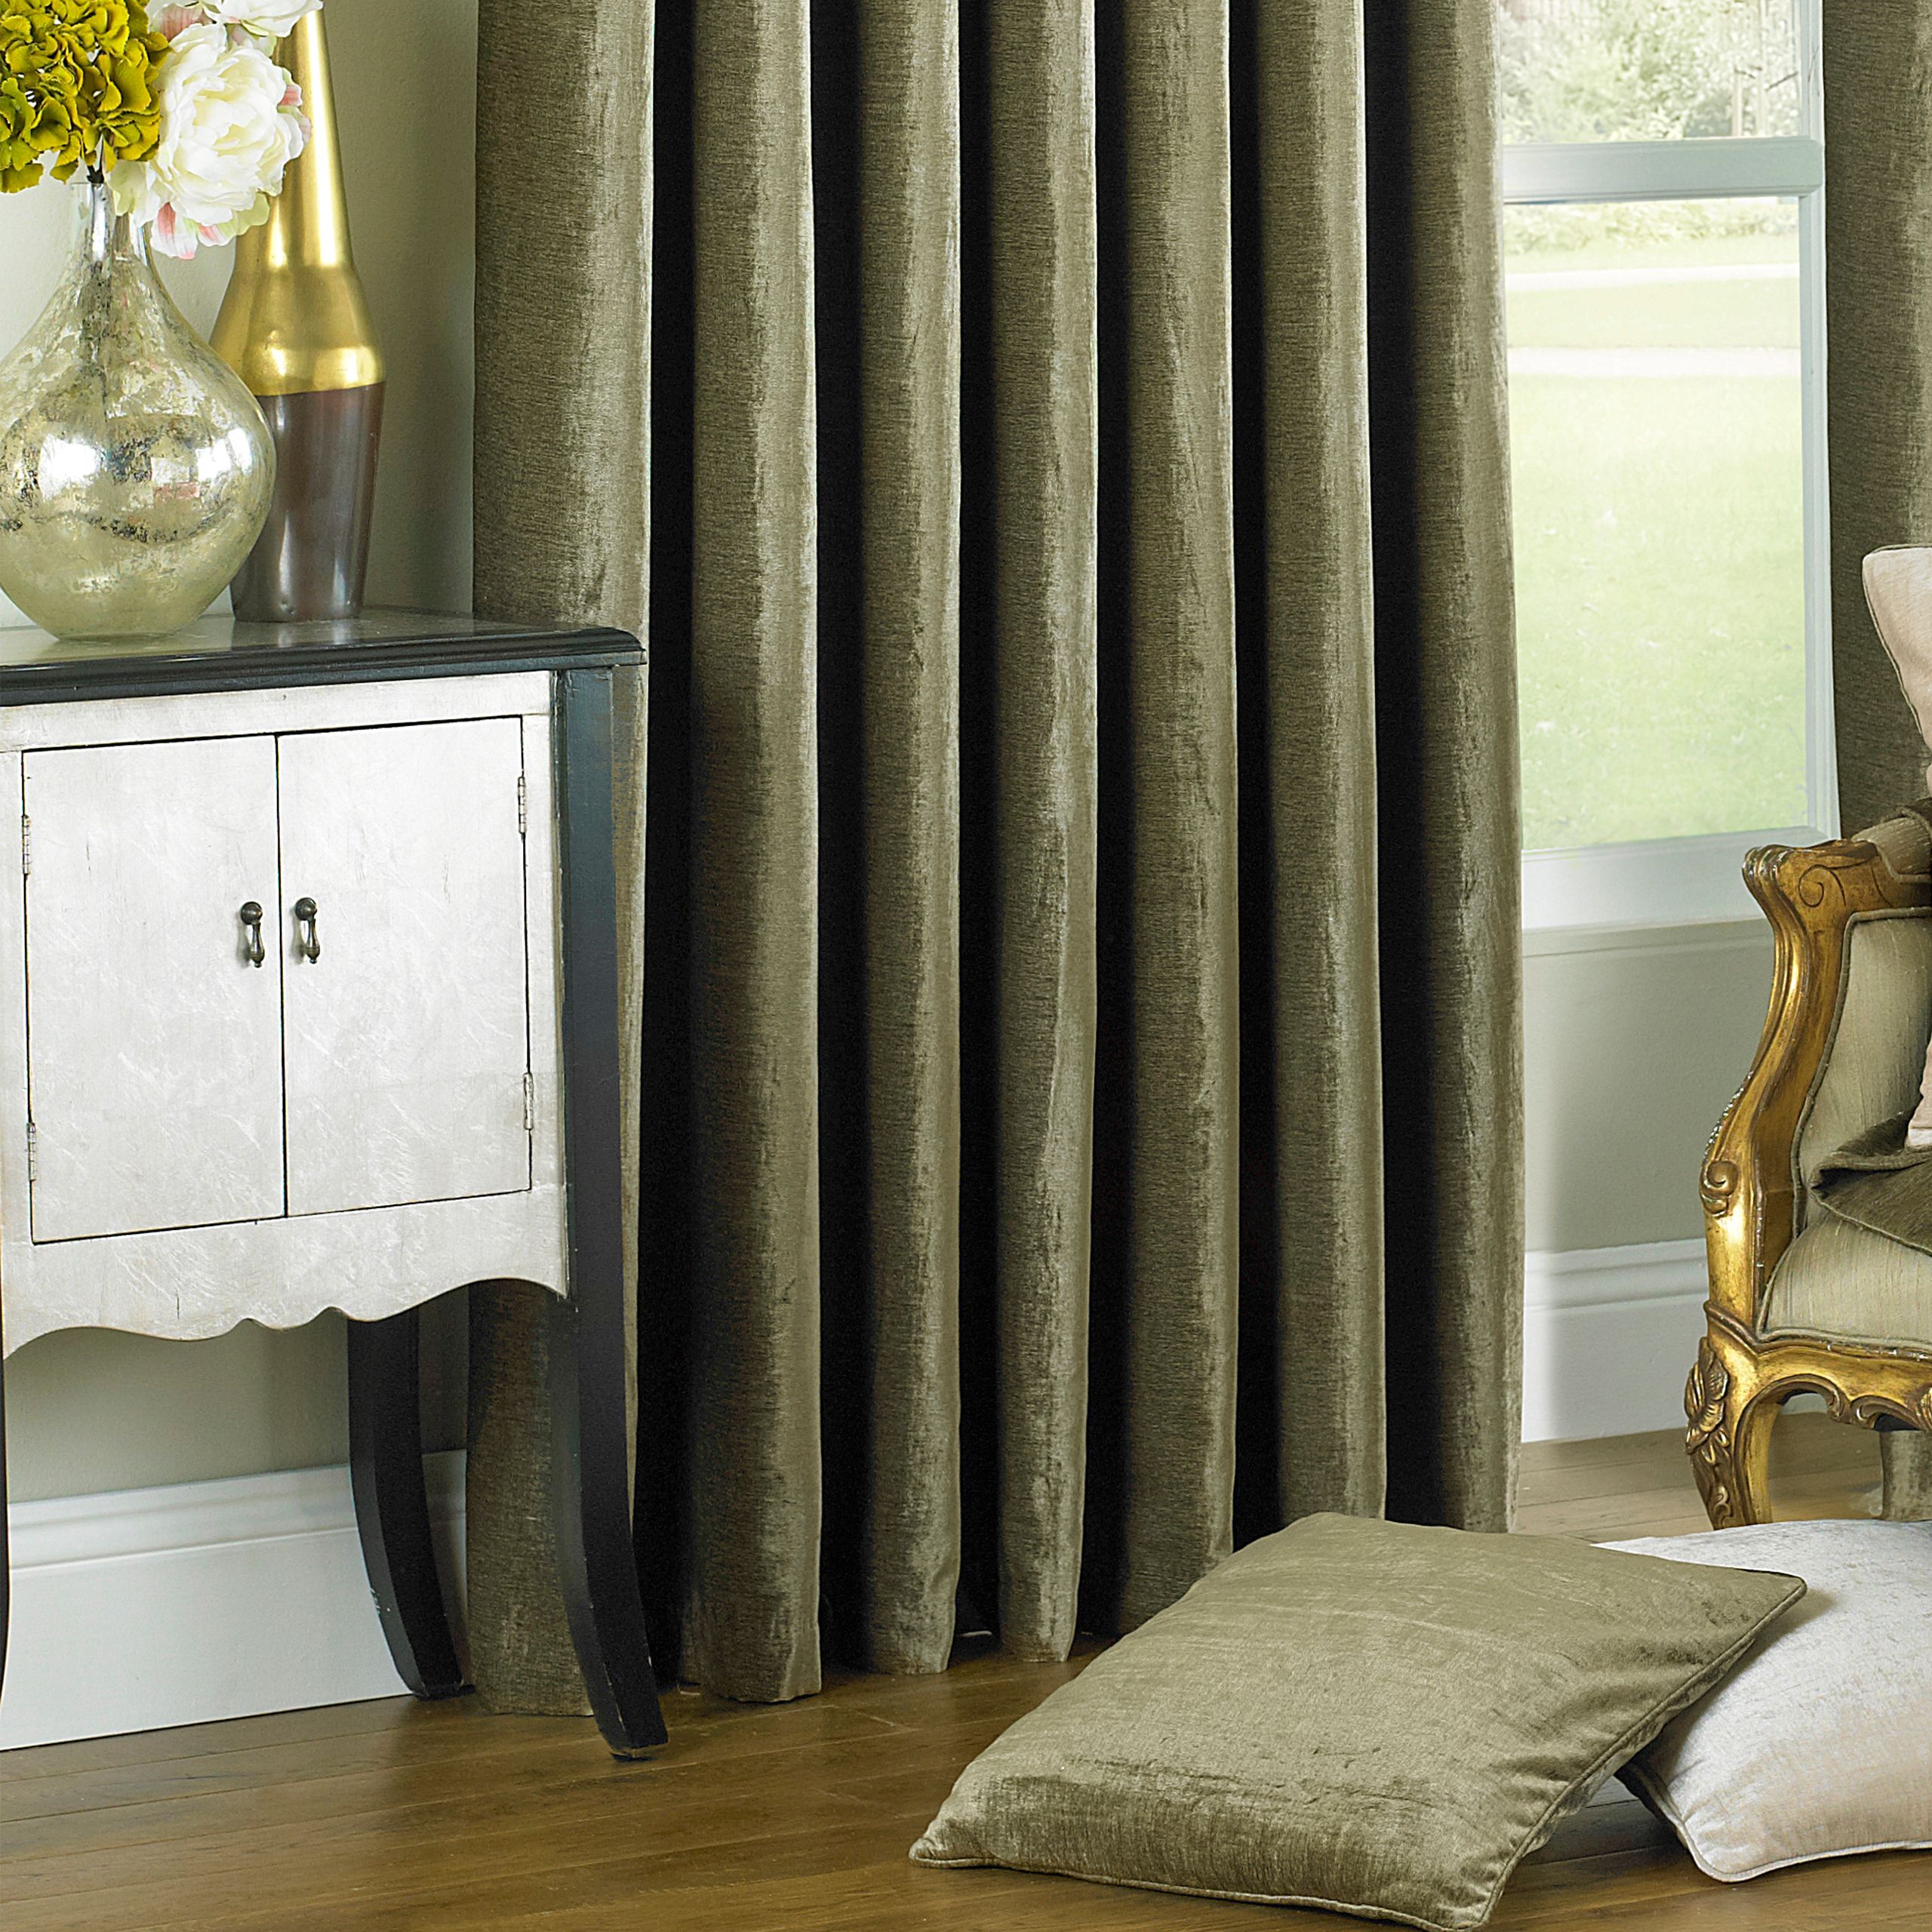 Created with opulent velvet feel fabric the Wellesley curtains are smooth to the touch and are available in a range of rich colour tones. These soft curtains have room darkening properties to help you have the best sleep possible so you can meet the new day refreshed and well-rested. Made of 100% hard-wearing polyester these curtains don’t stain easily making them ideal for busy households with kids or pets. Their eyelet ring top design means you need not have to fuss with hooks and tabs. Mix and match your Wellesley curtains with the whole collection of cushions and throws.